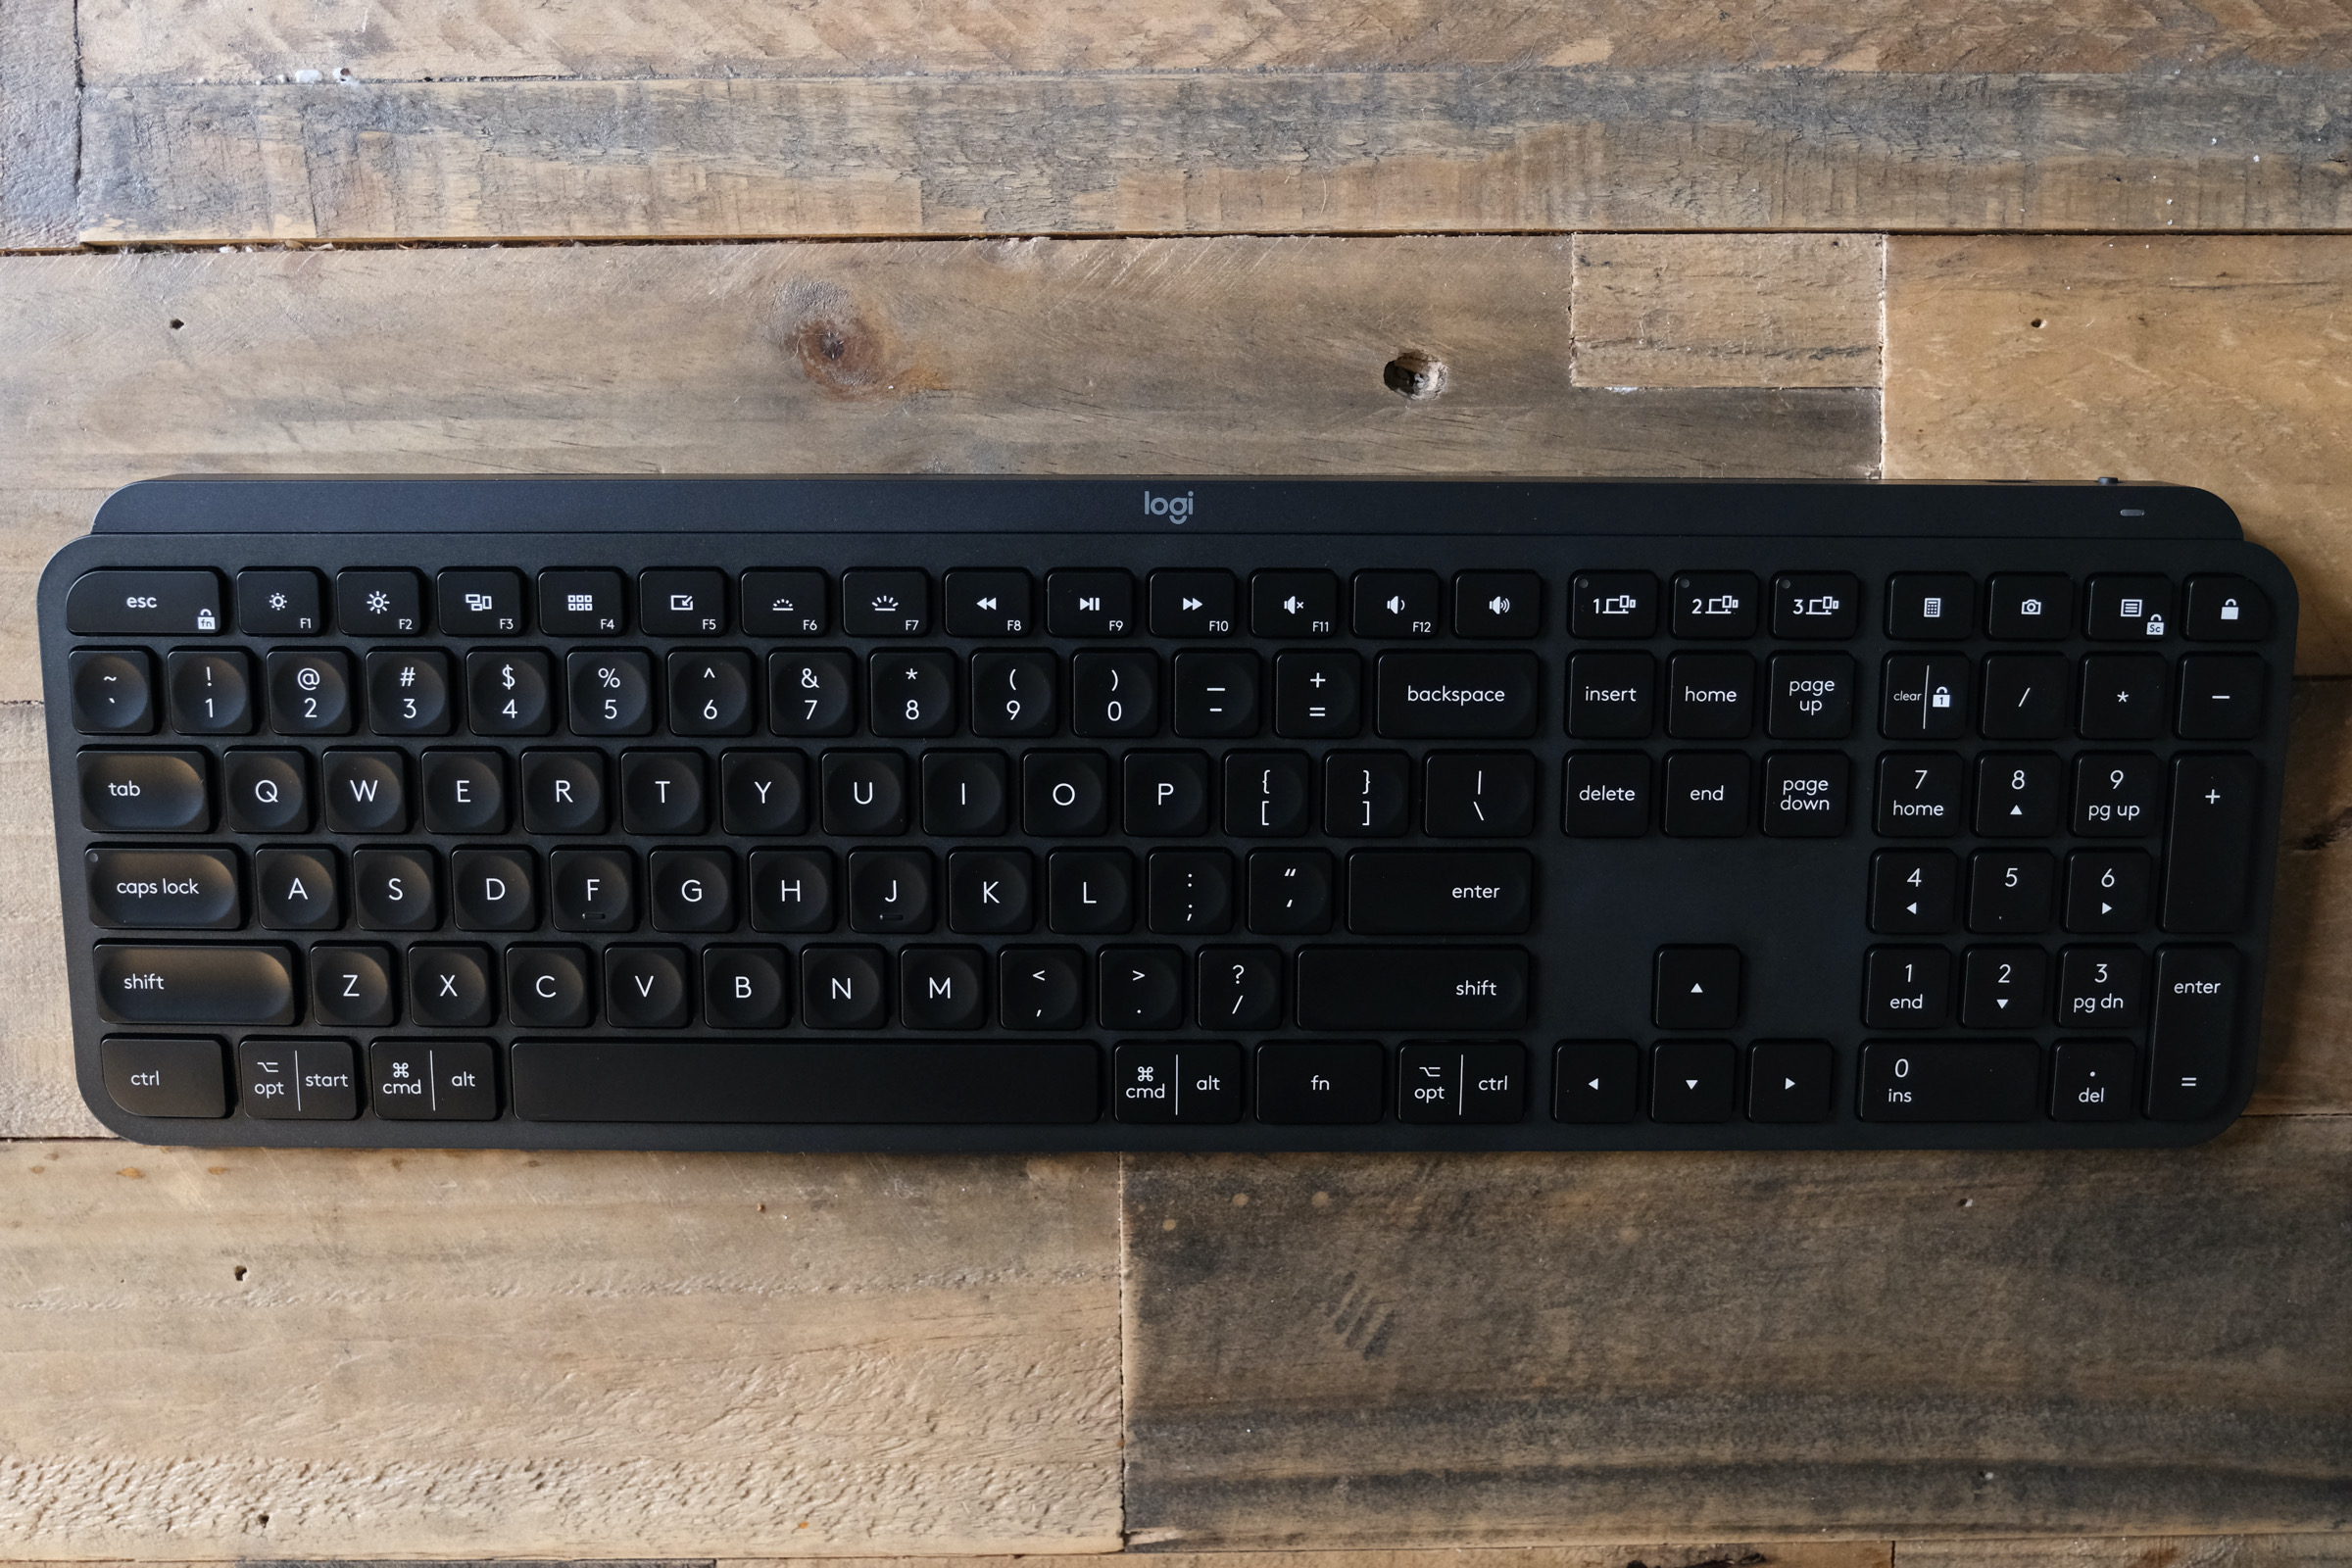 Logitech S Mx Master 3 Mouse And Mx Keys Keyboard Should Be Your